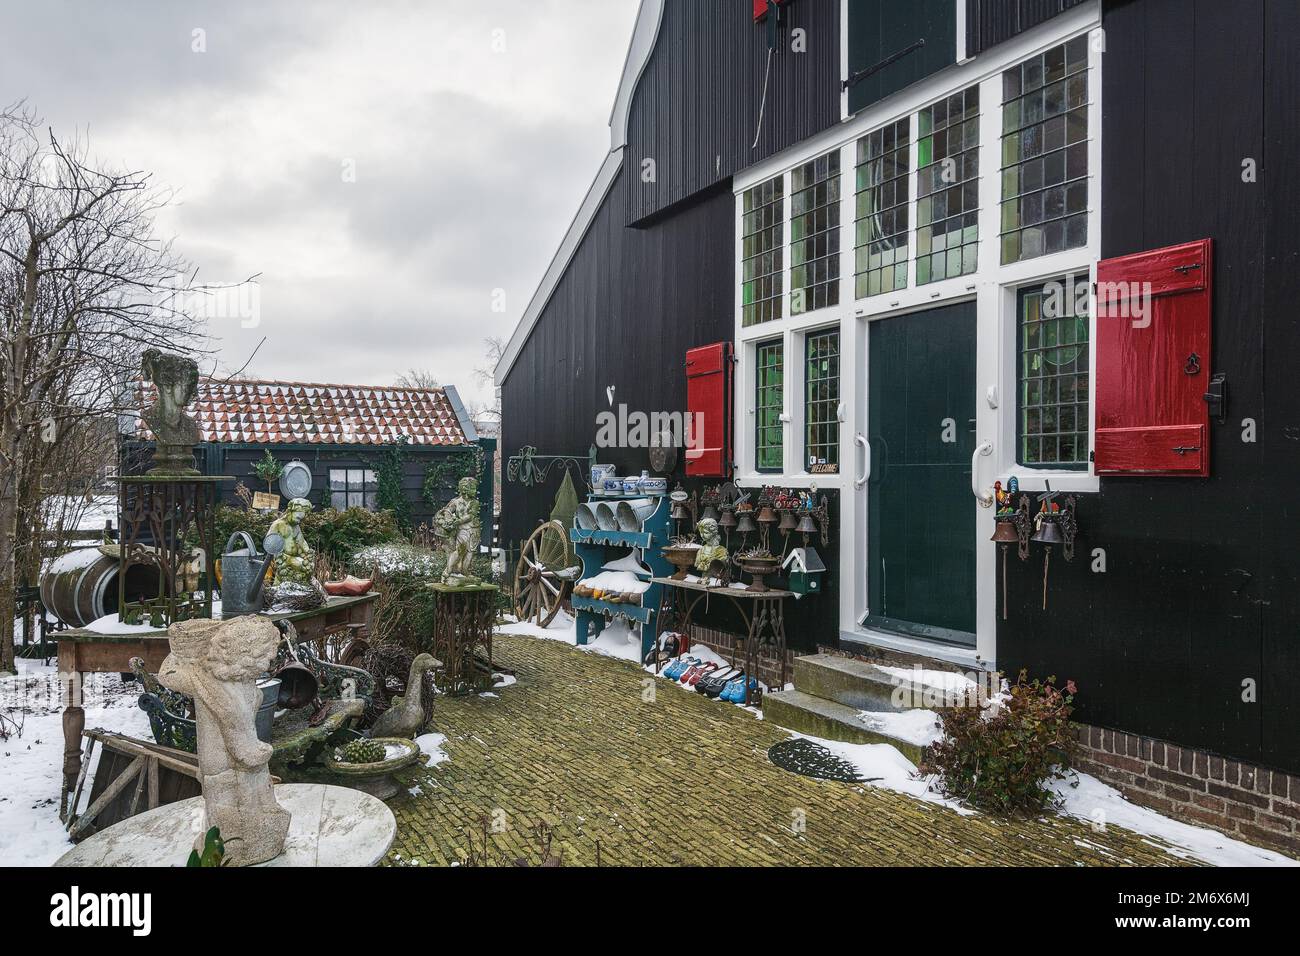 Zaandam, Netherlands, February 10, 2021: A small market for used, old garden decorations in the courtyard of the house. Stock Photo